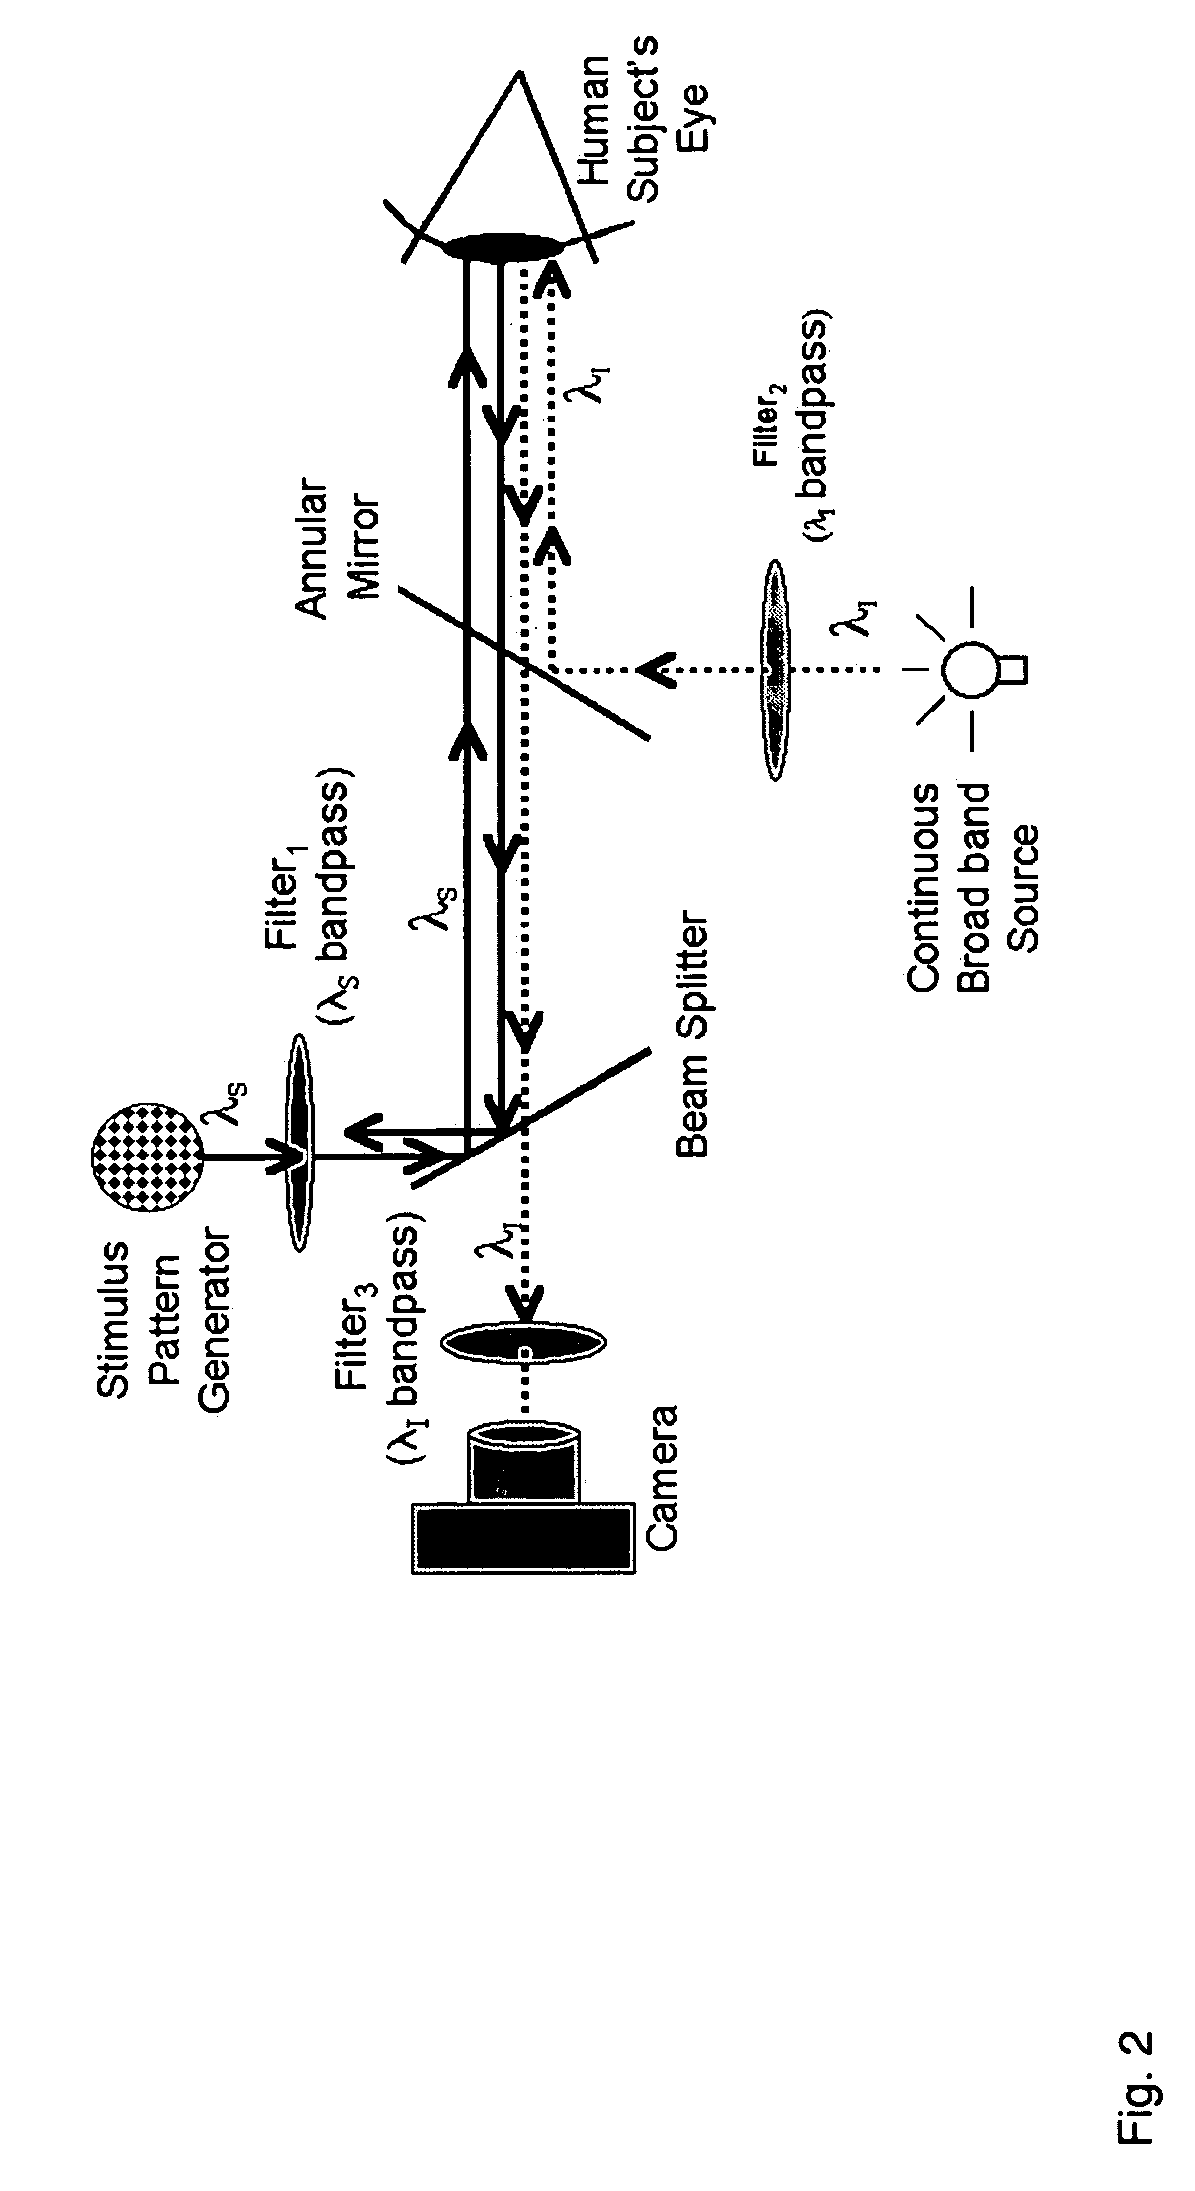 Device and method for optical imaging of retinal function